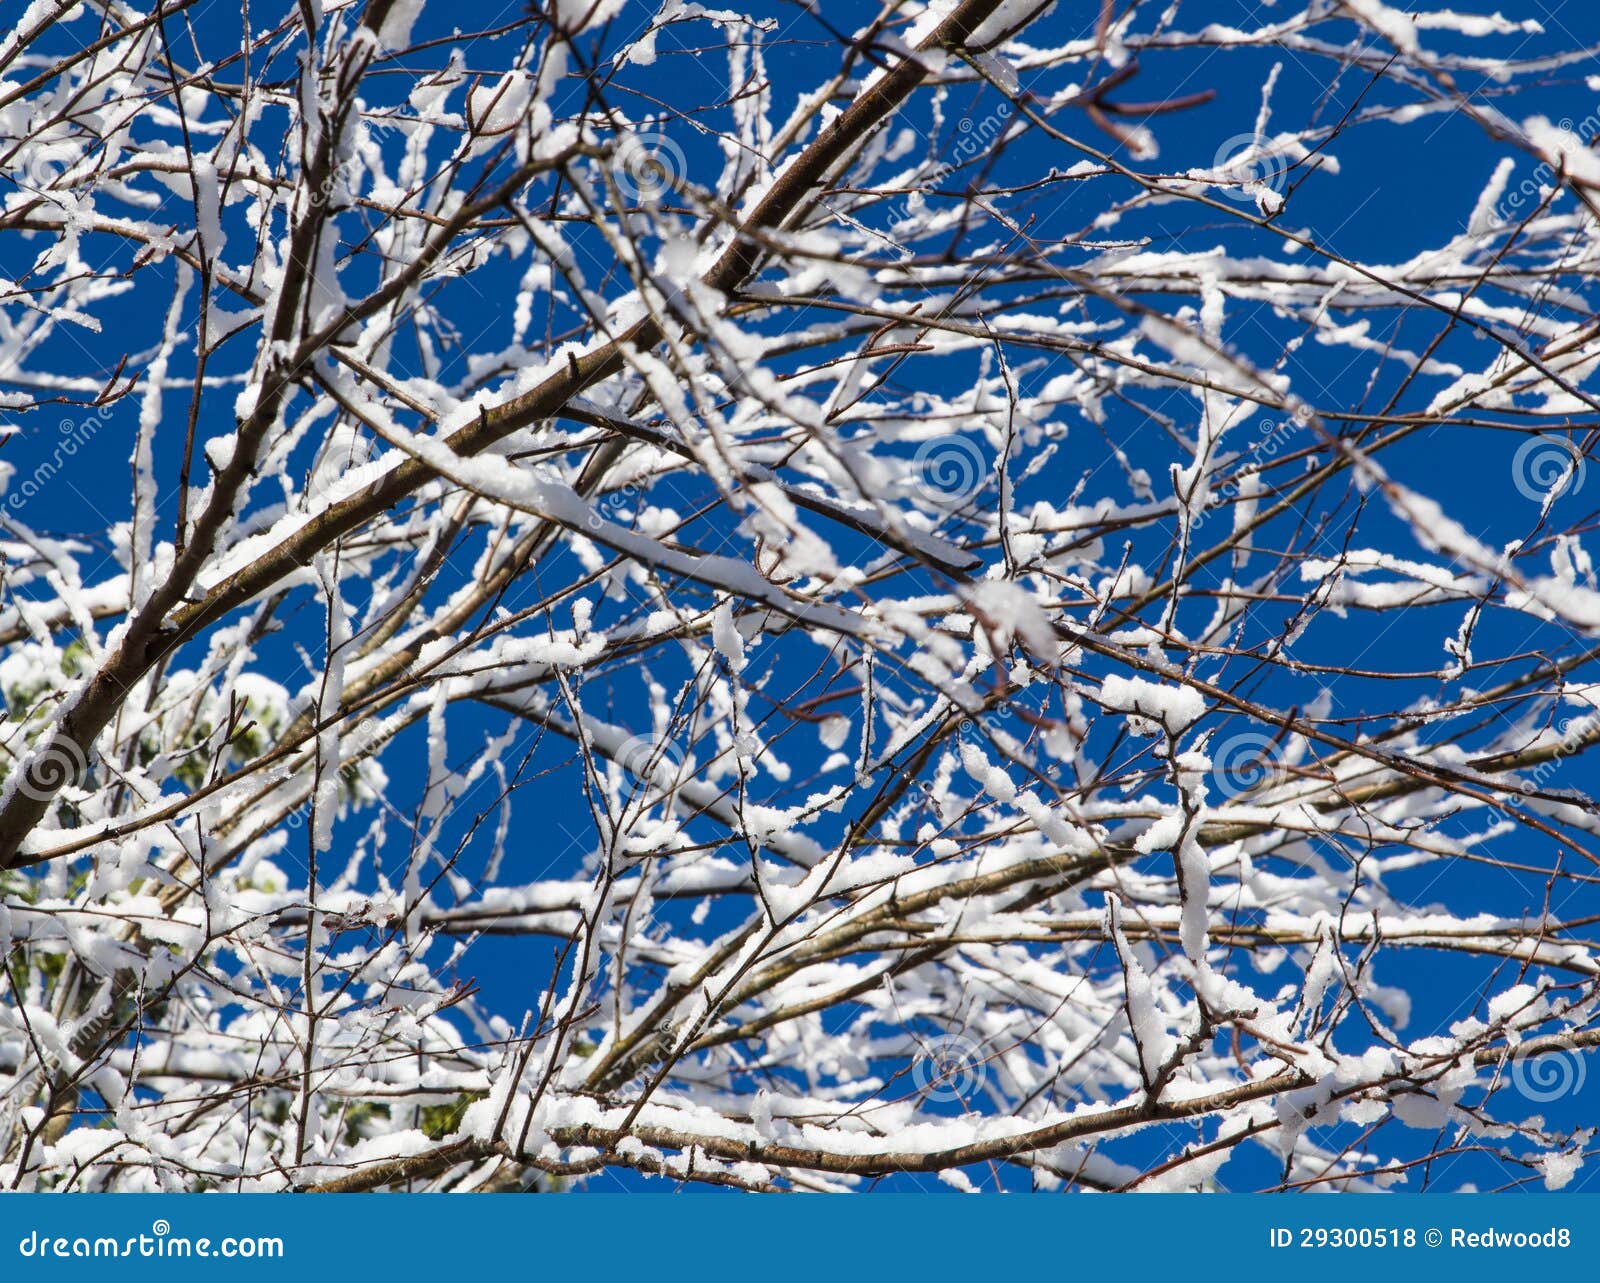 Wintery Snowfall on Tree Branches Stock Photo - Image of card, frozen